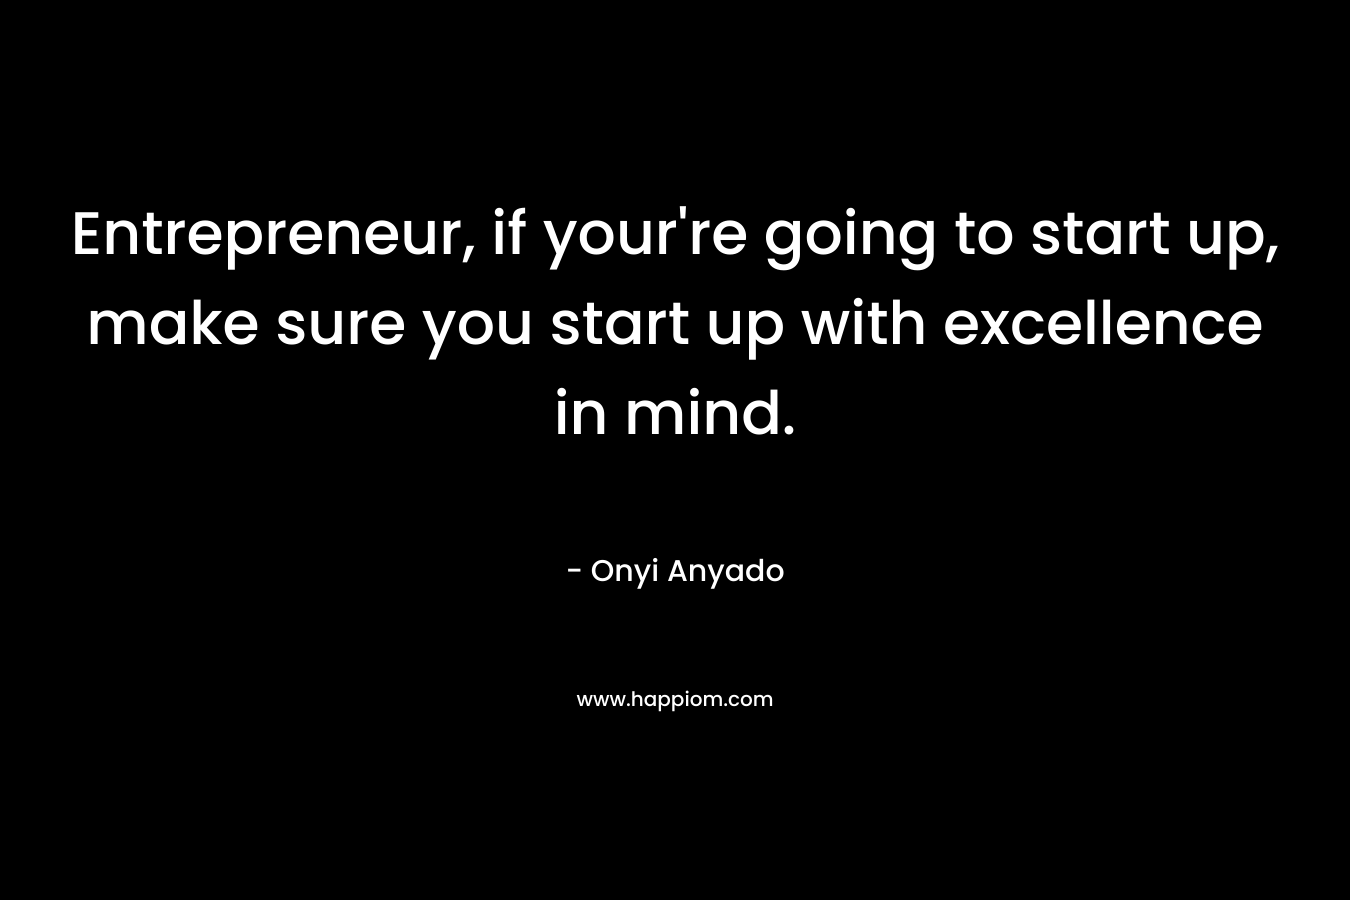 Entrepreneur, if your're going to start up, make sure you start up with excellence in mind.